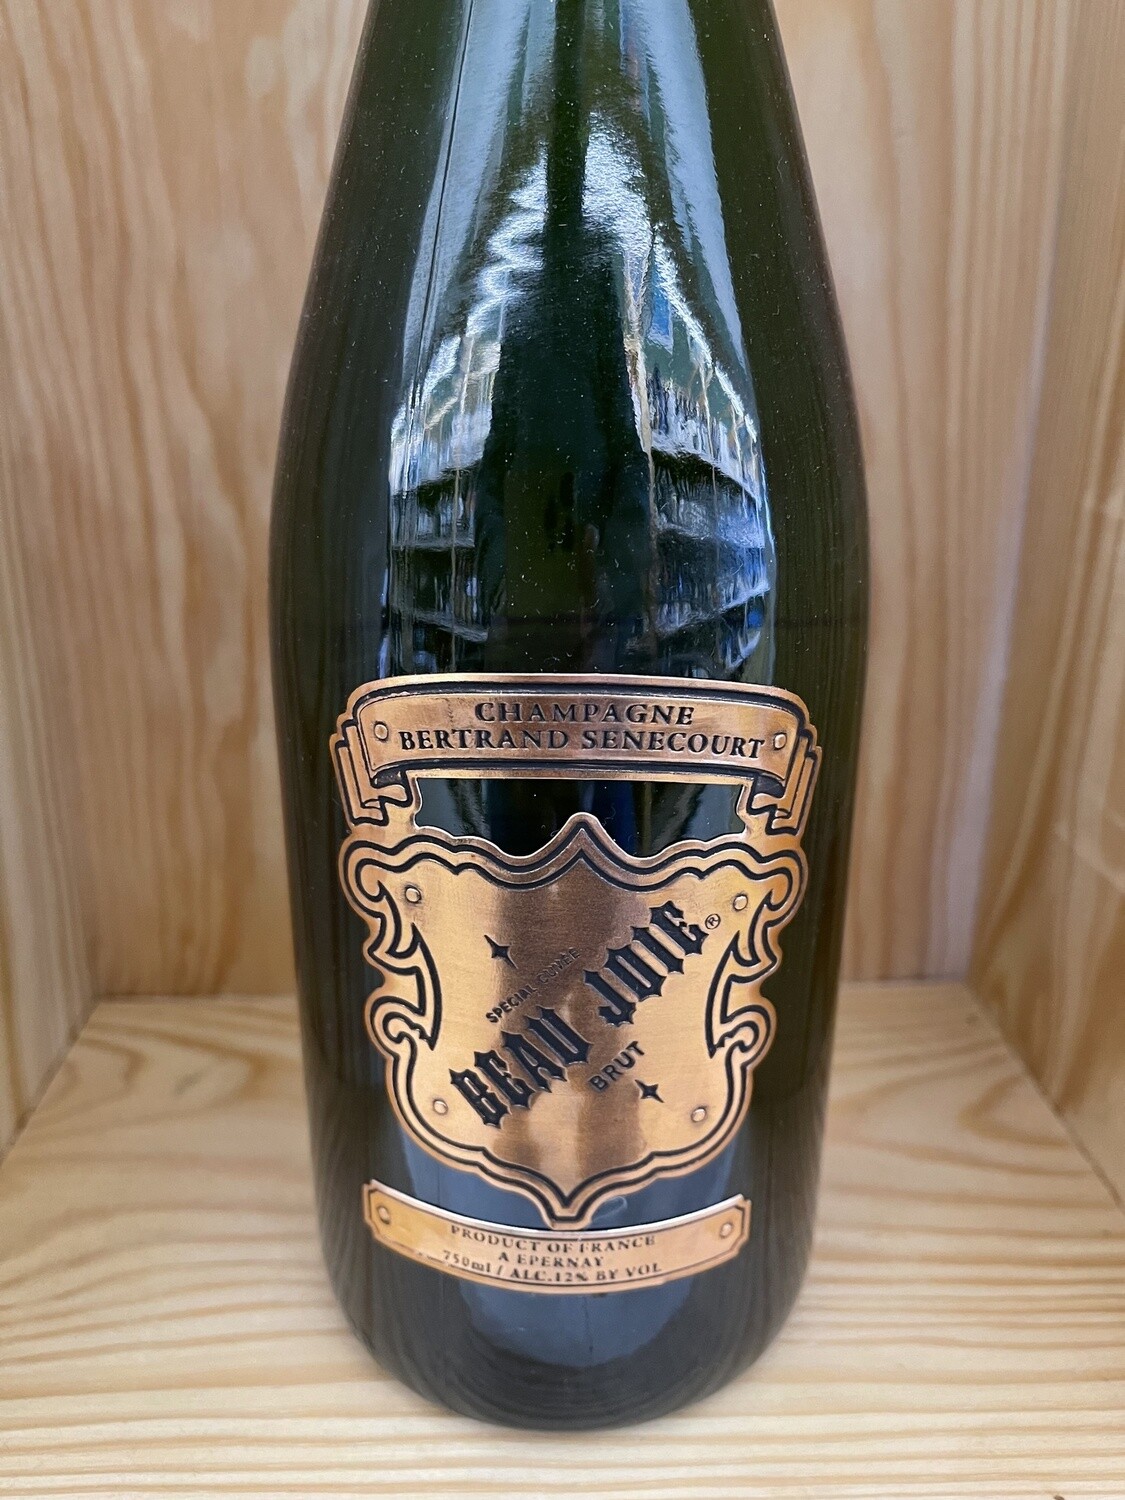 BEAU JOIE SPECIAL CUVEE BRUT CHAMPAGNE